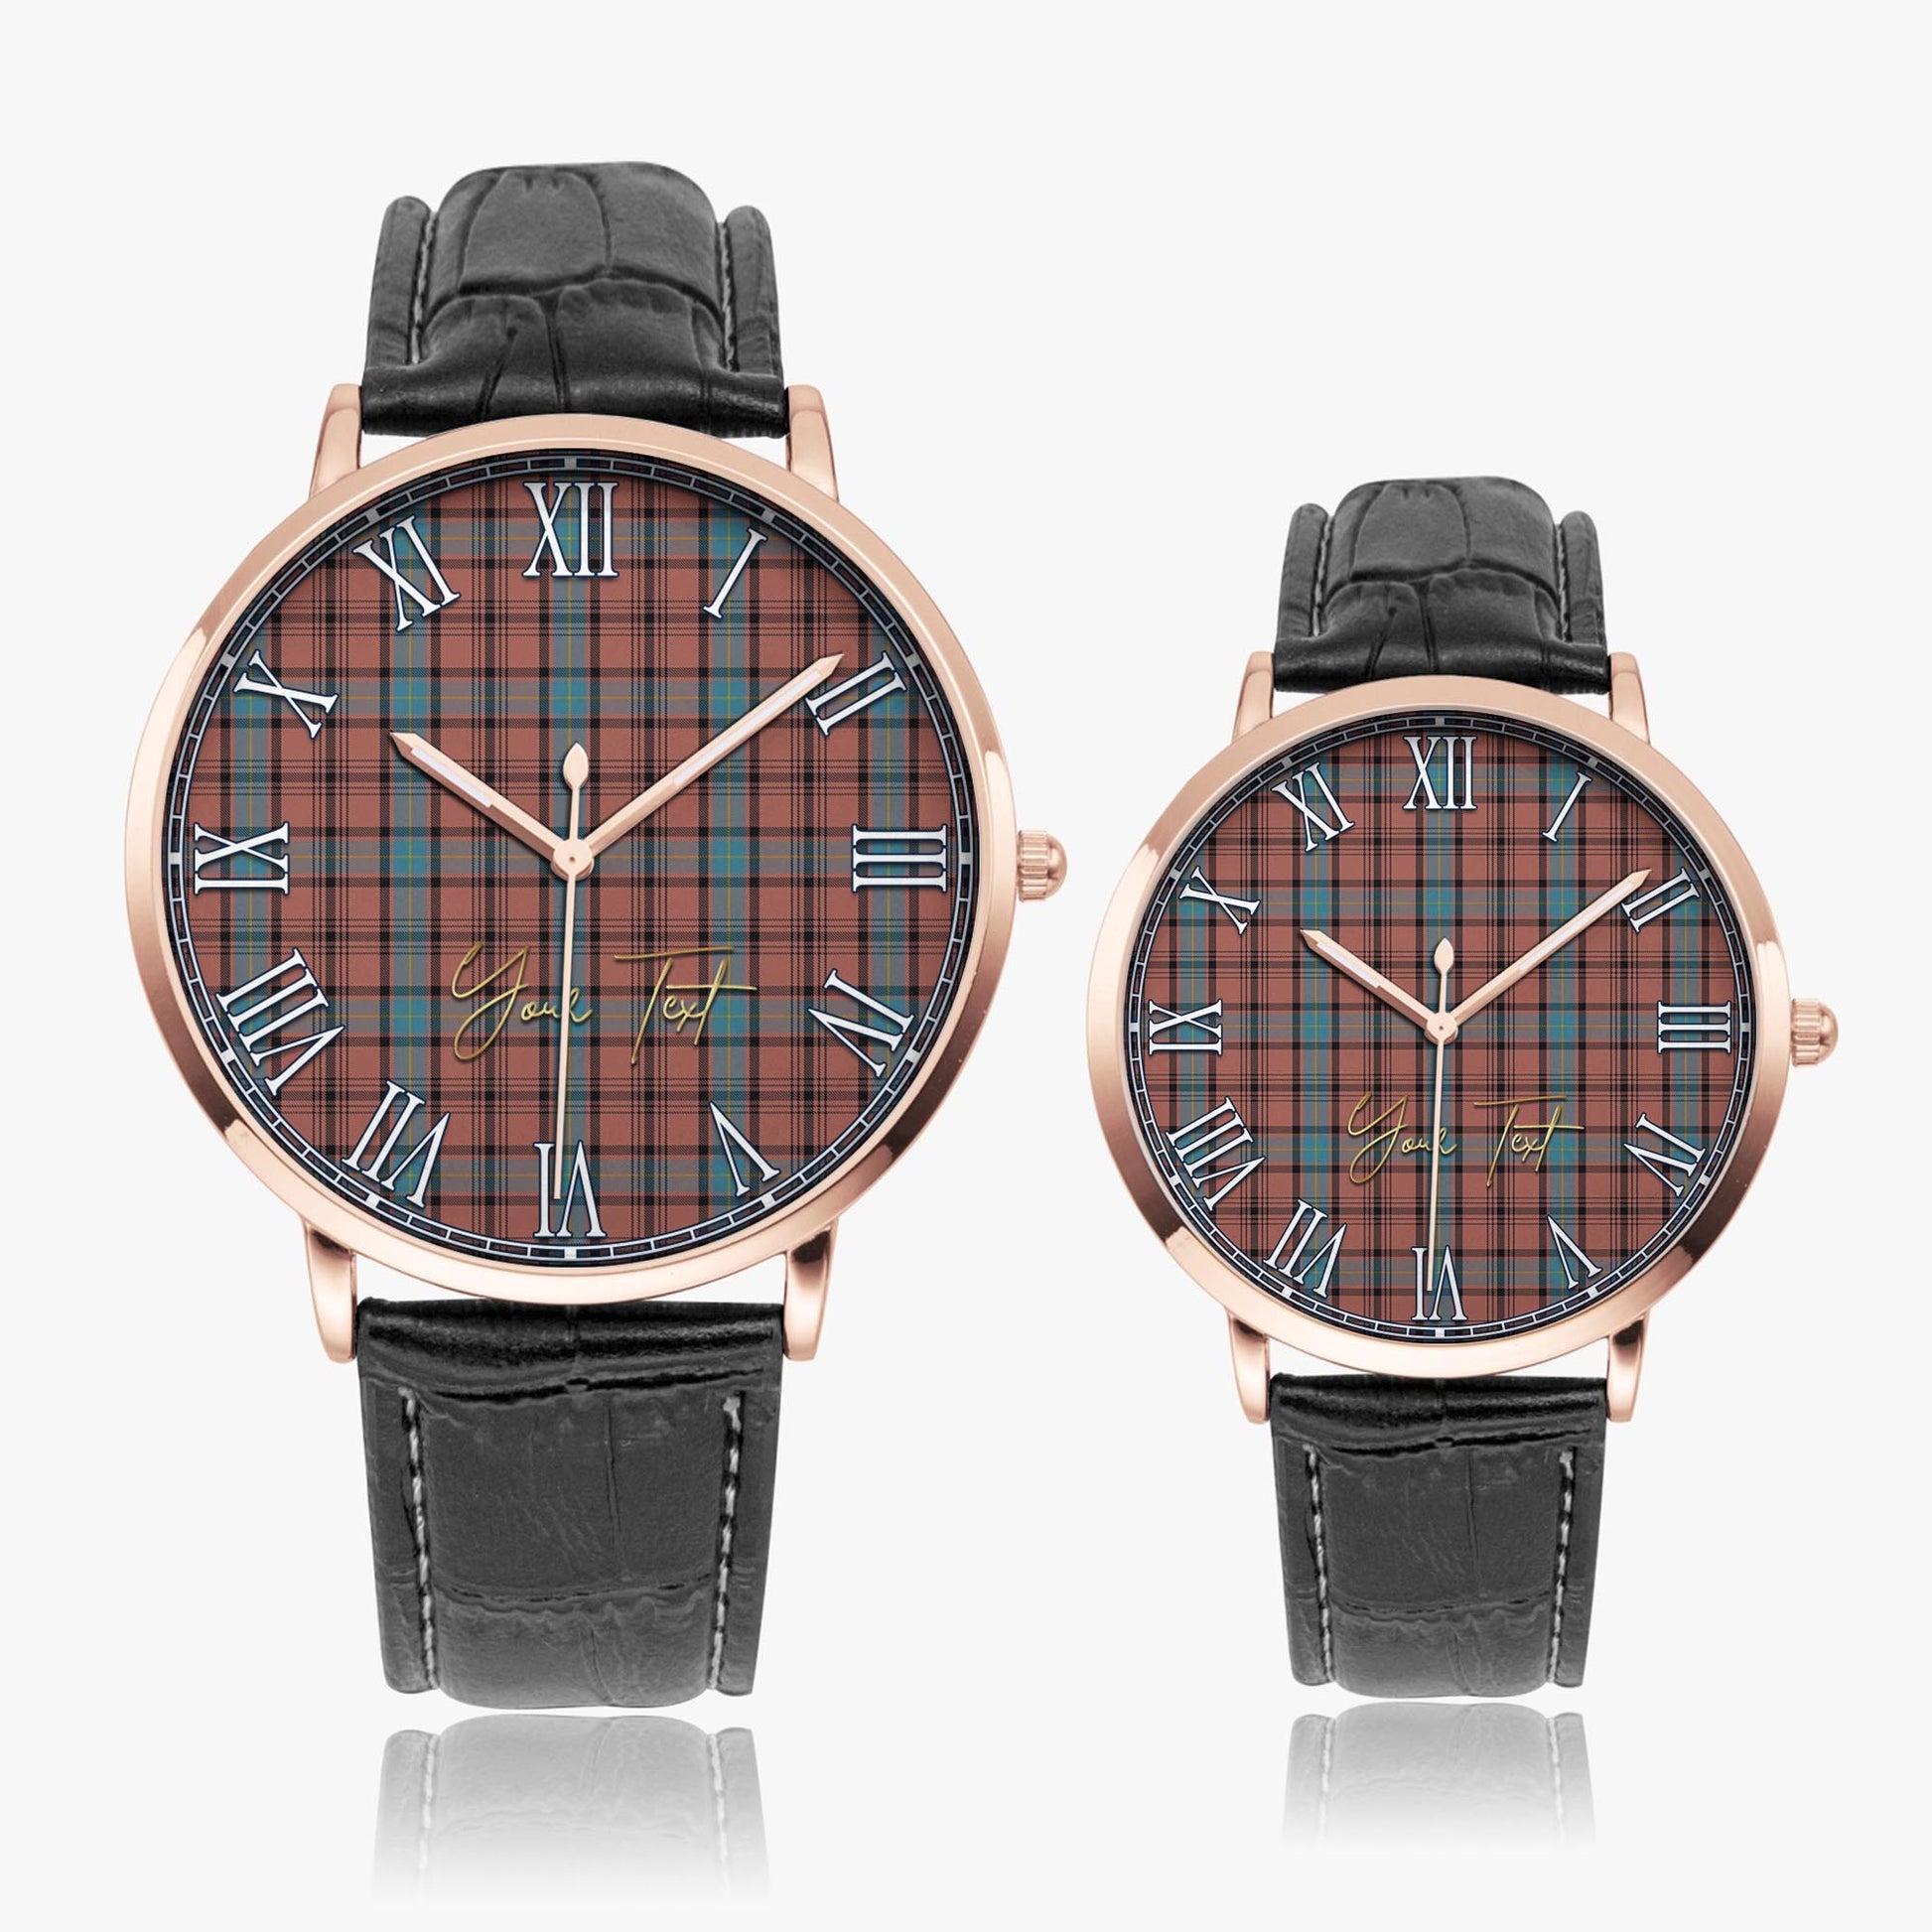 Hannay Dress Tartan Personalized Your Text Leather Trap Quartz Watch Ultra Thin Rose Gold Case With Black Leather Strap - Tartanvibesclothing